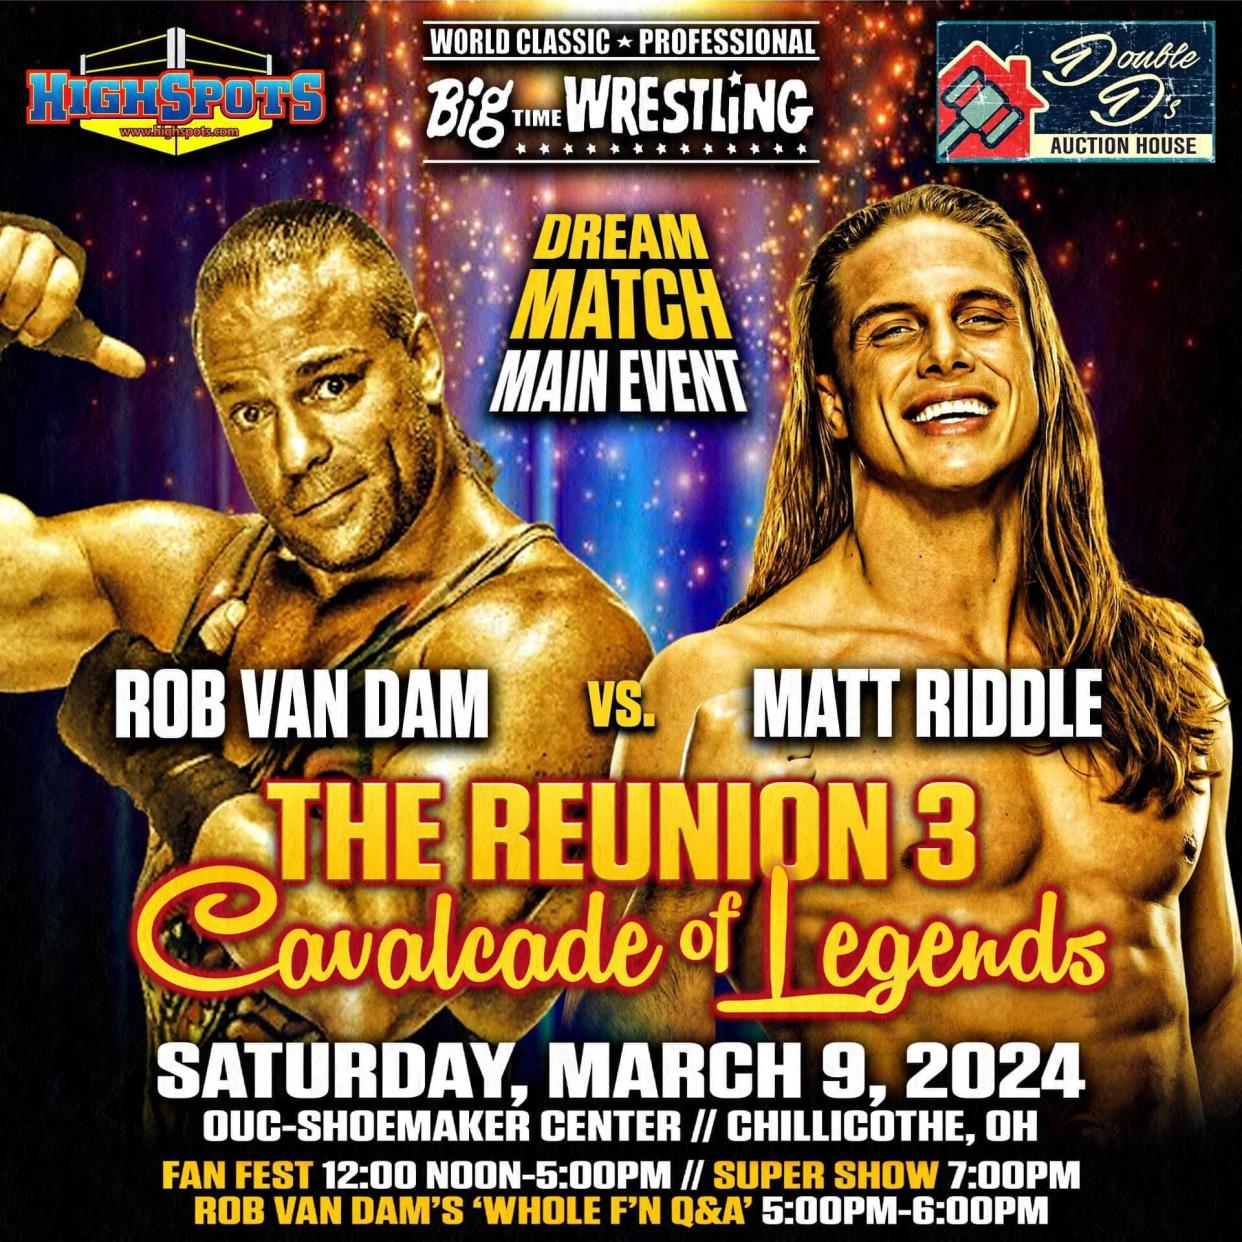 Rob Van Dam will face Matt Riddle at Big Time Wrestling's The Reunion 3: Cavalcade of Legends on March 9 at the OUC Shoemaker Center in Chillicothe.